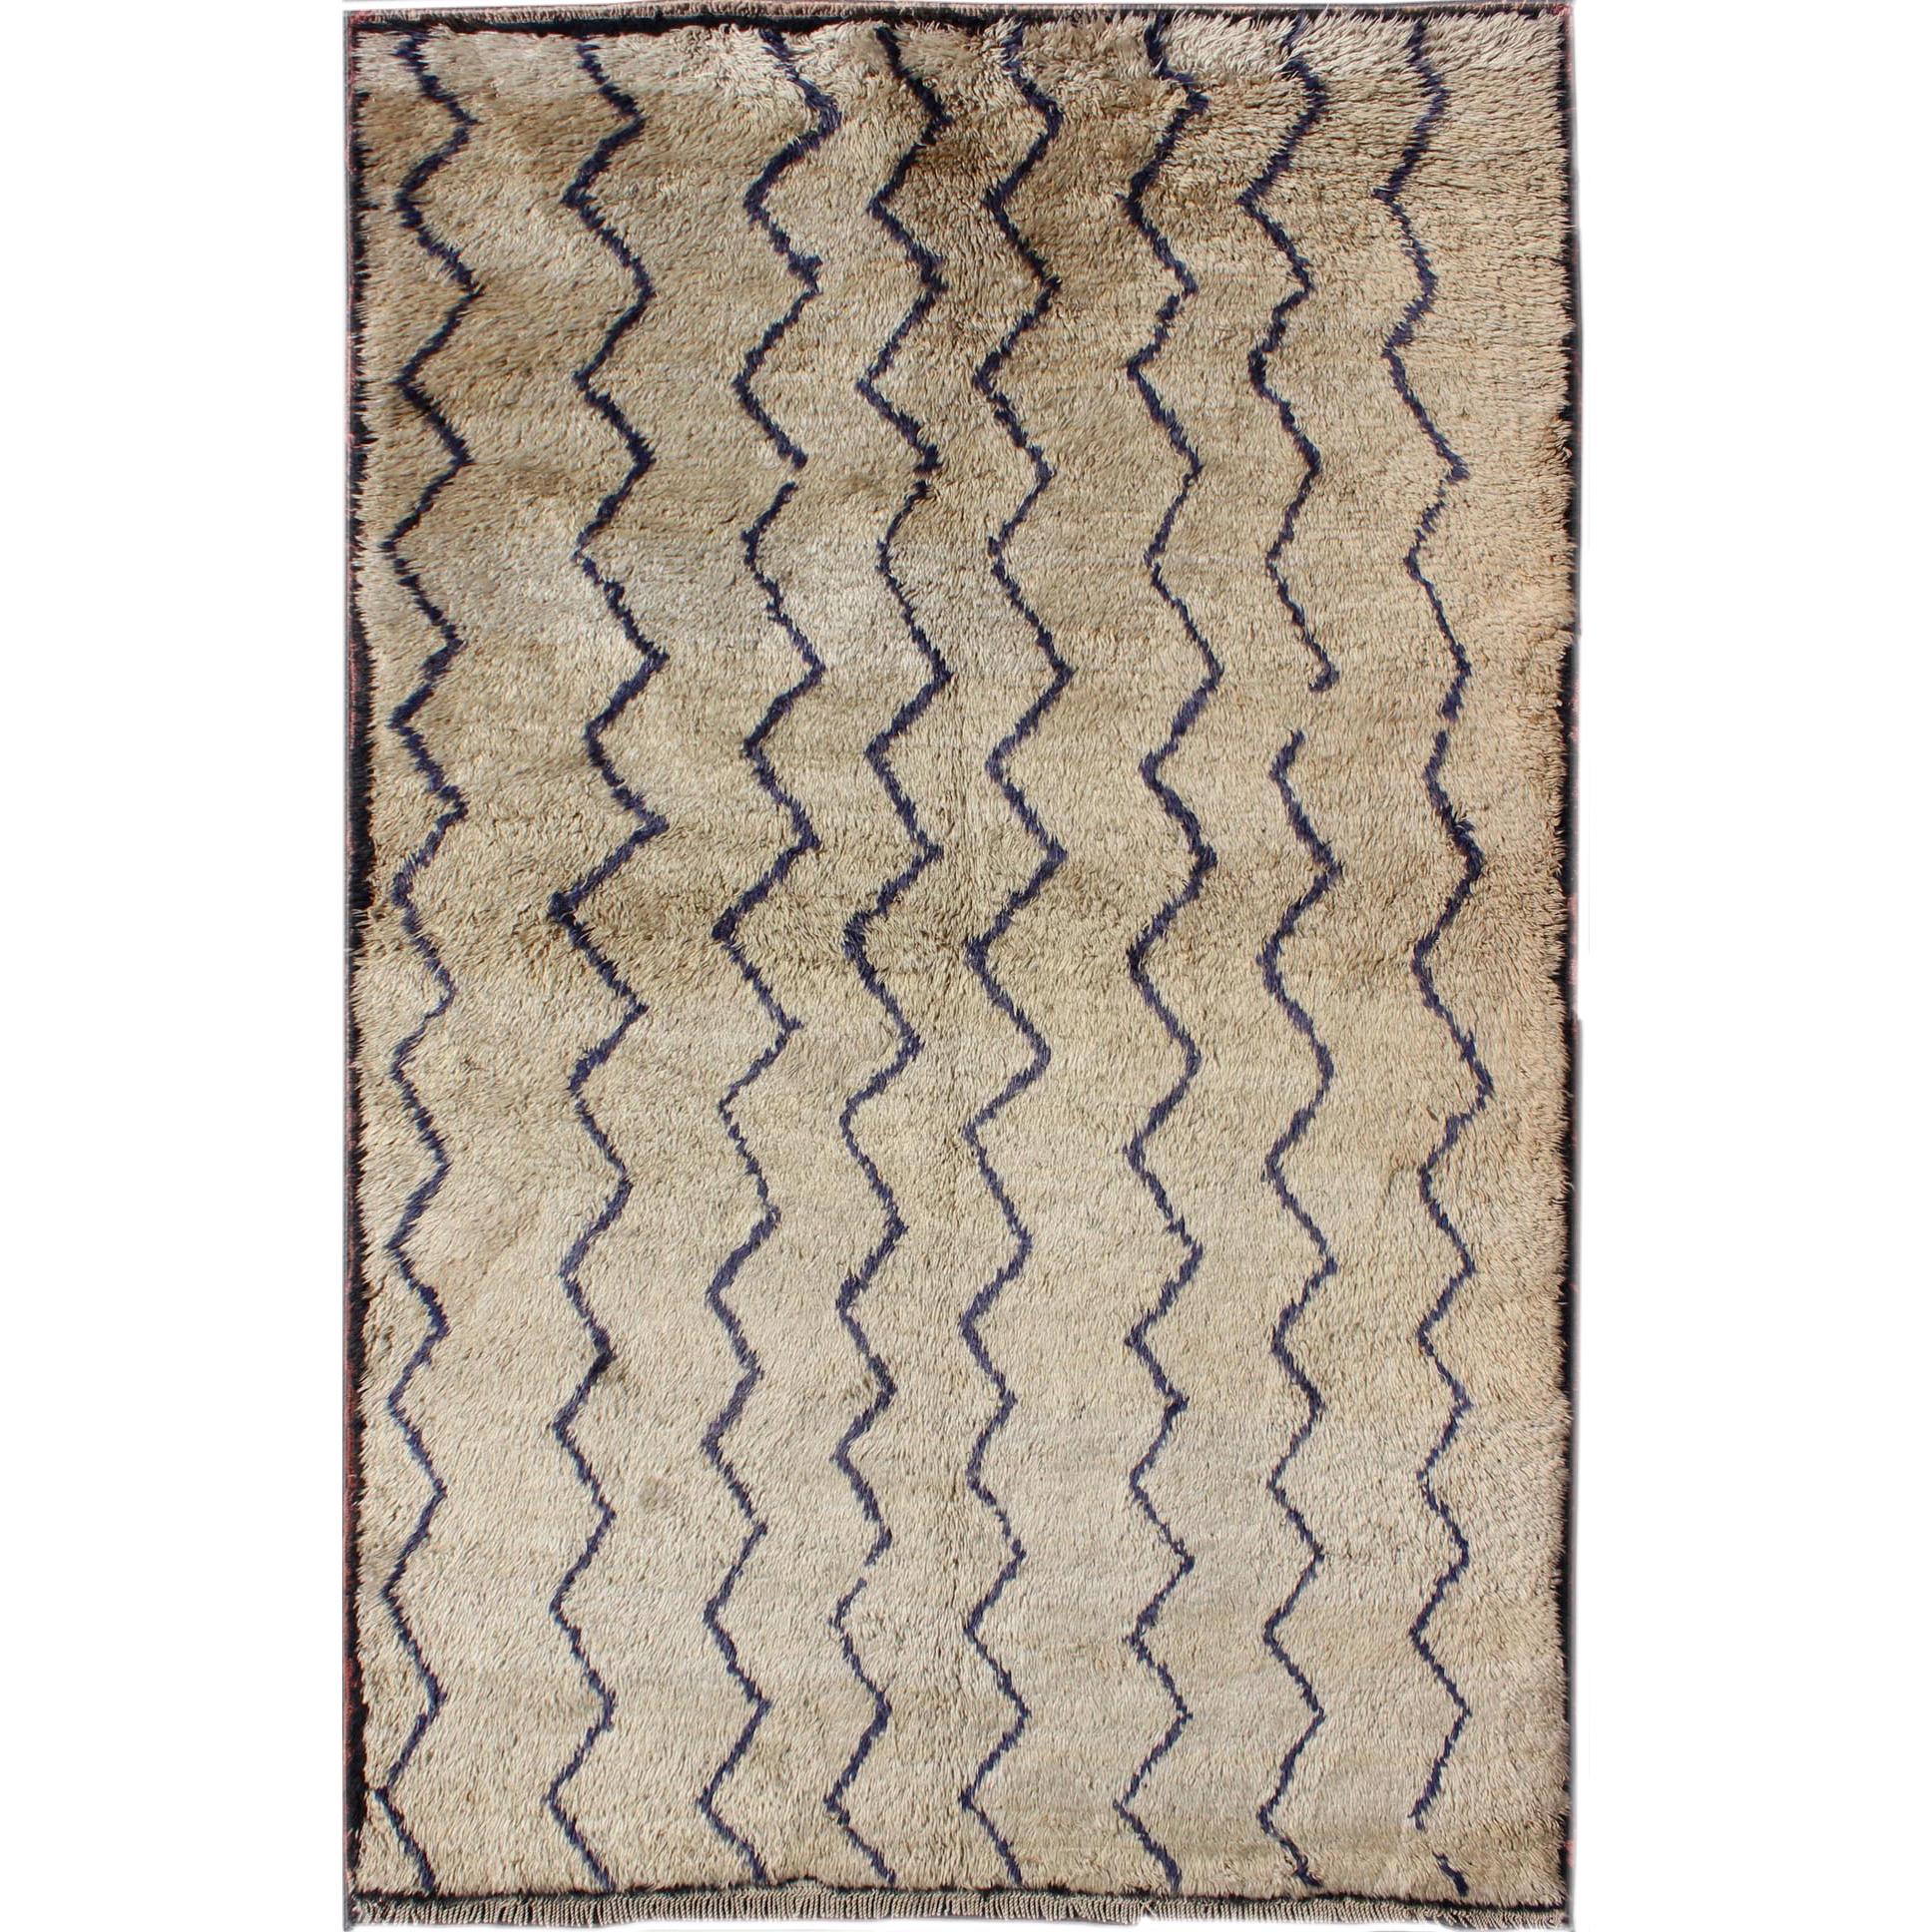 Vintage Tulu Rug With Modern Design in Off Taupe Color and Dark Blue Lines